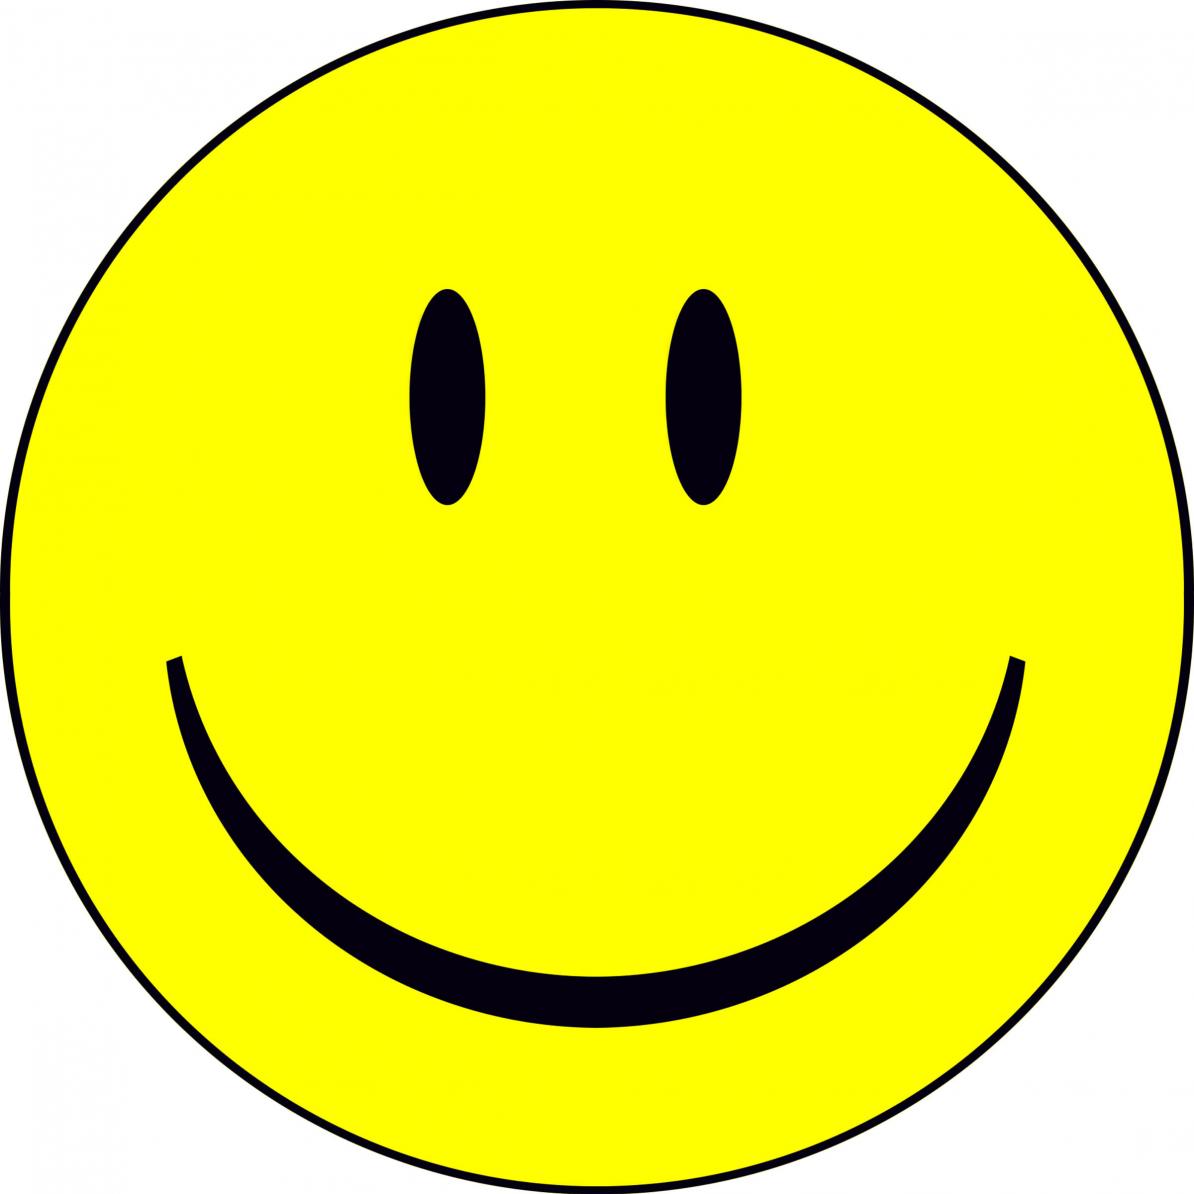 laughing smiley faces clip art